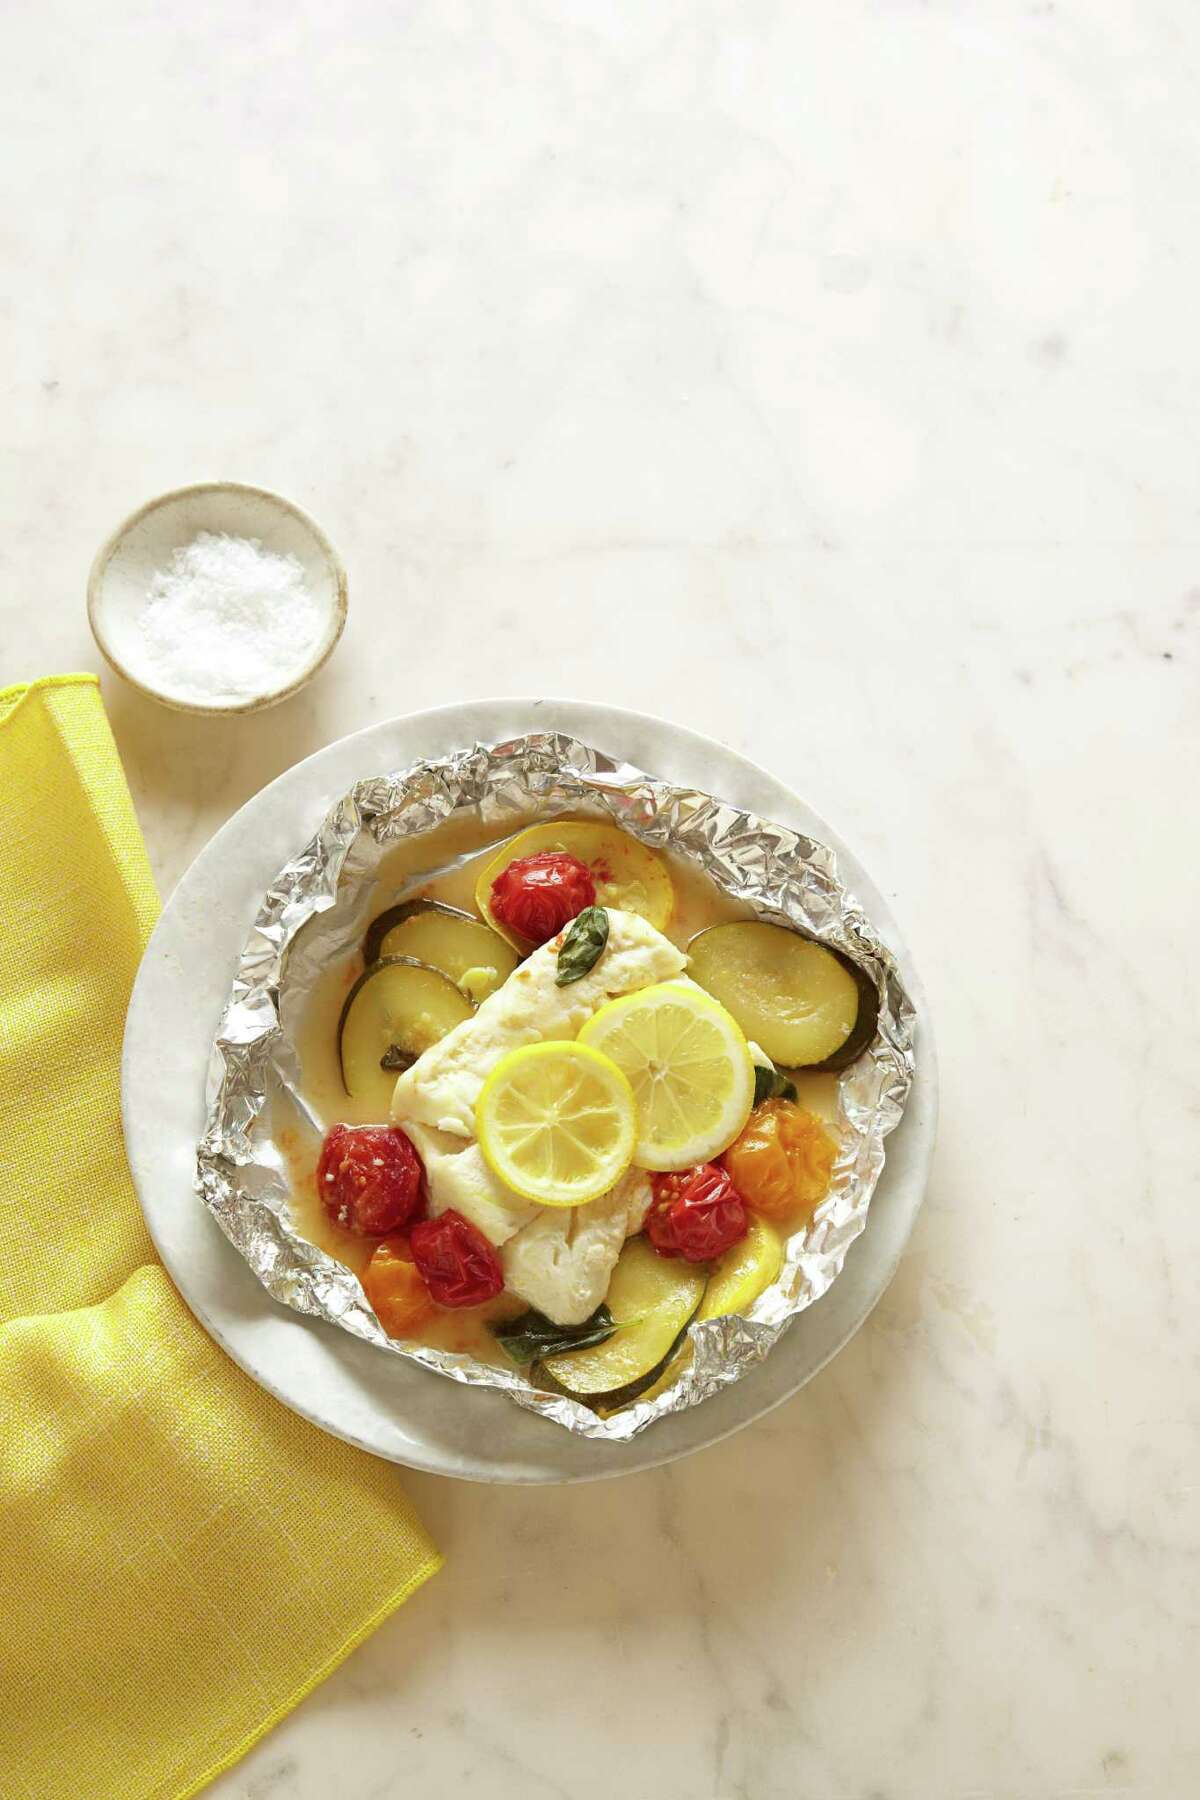 Steamed Summer Cod, from Good Housekeeping